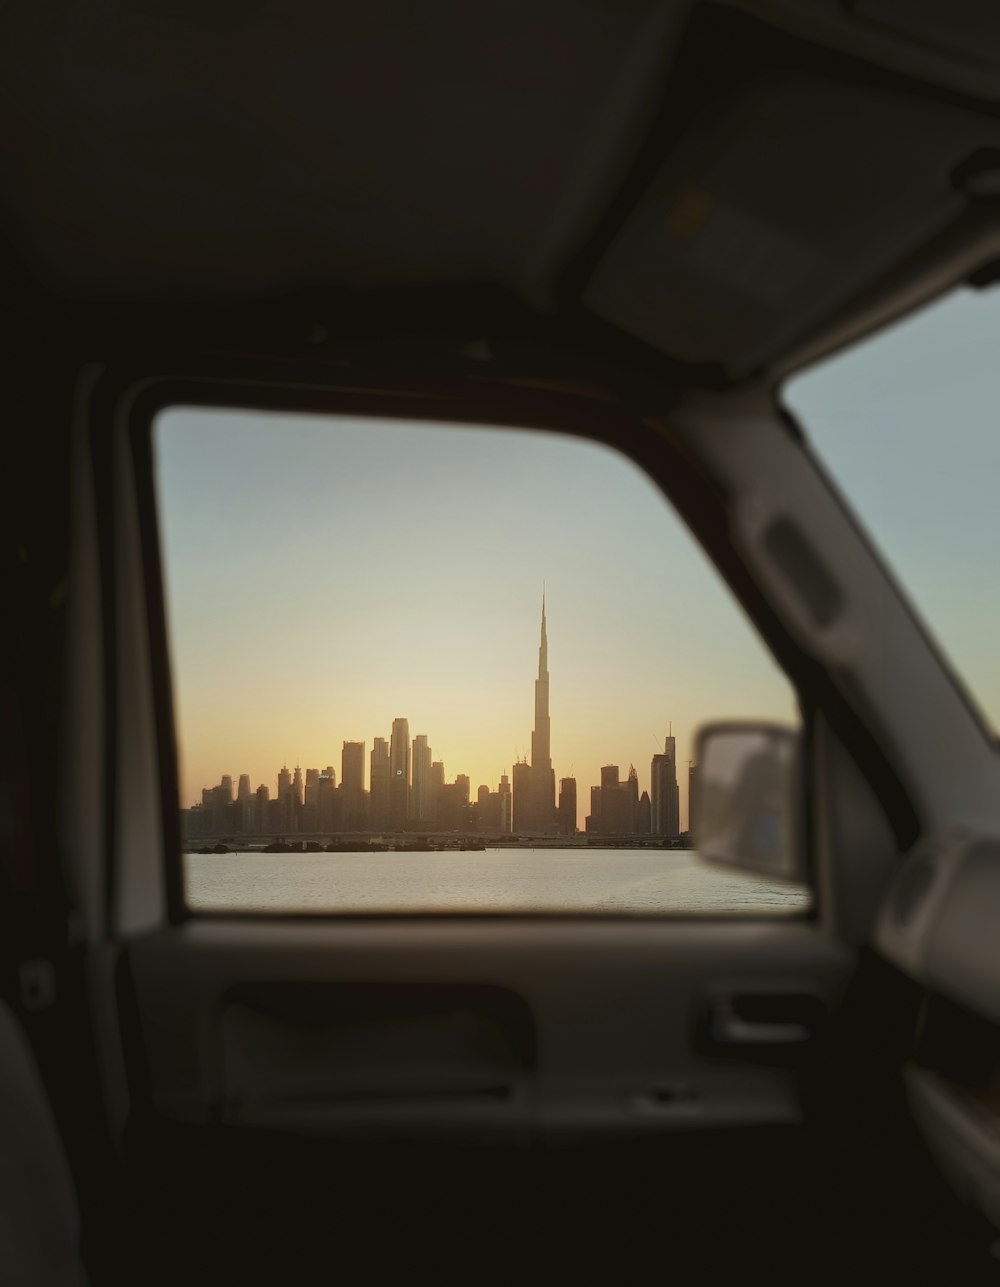 a view of a city from inside a vehicle